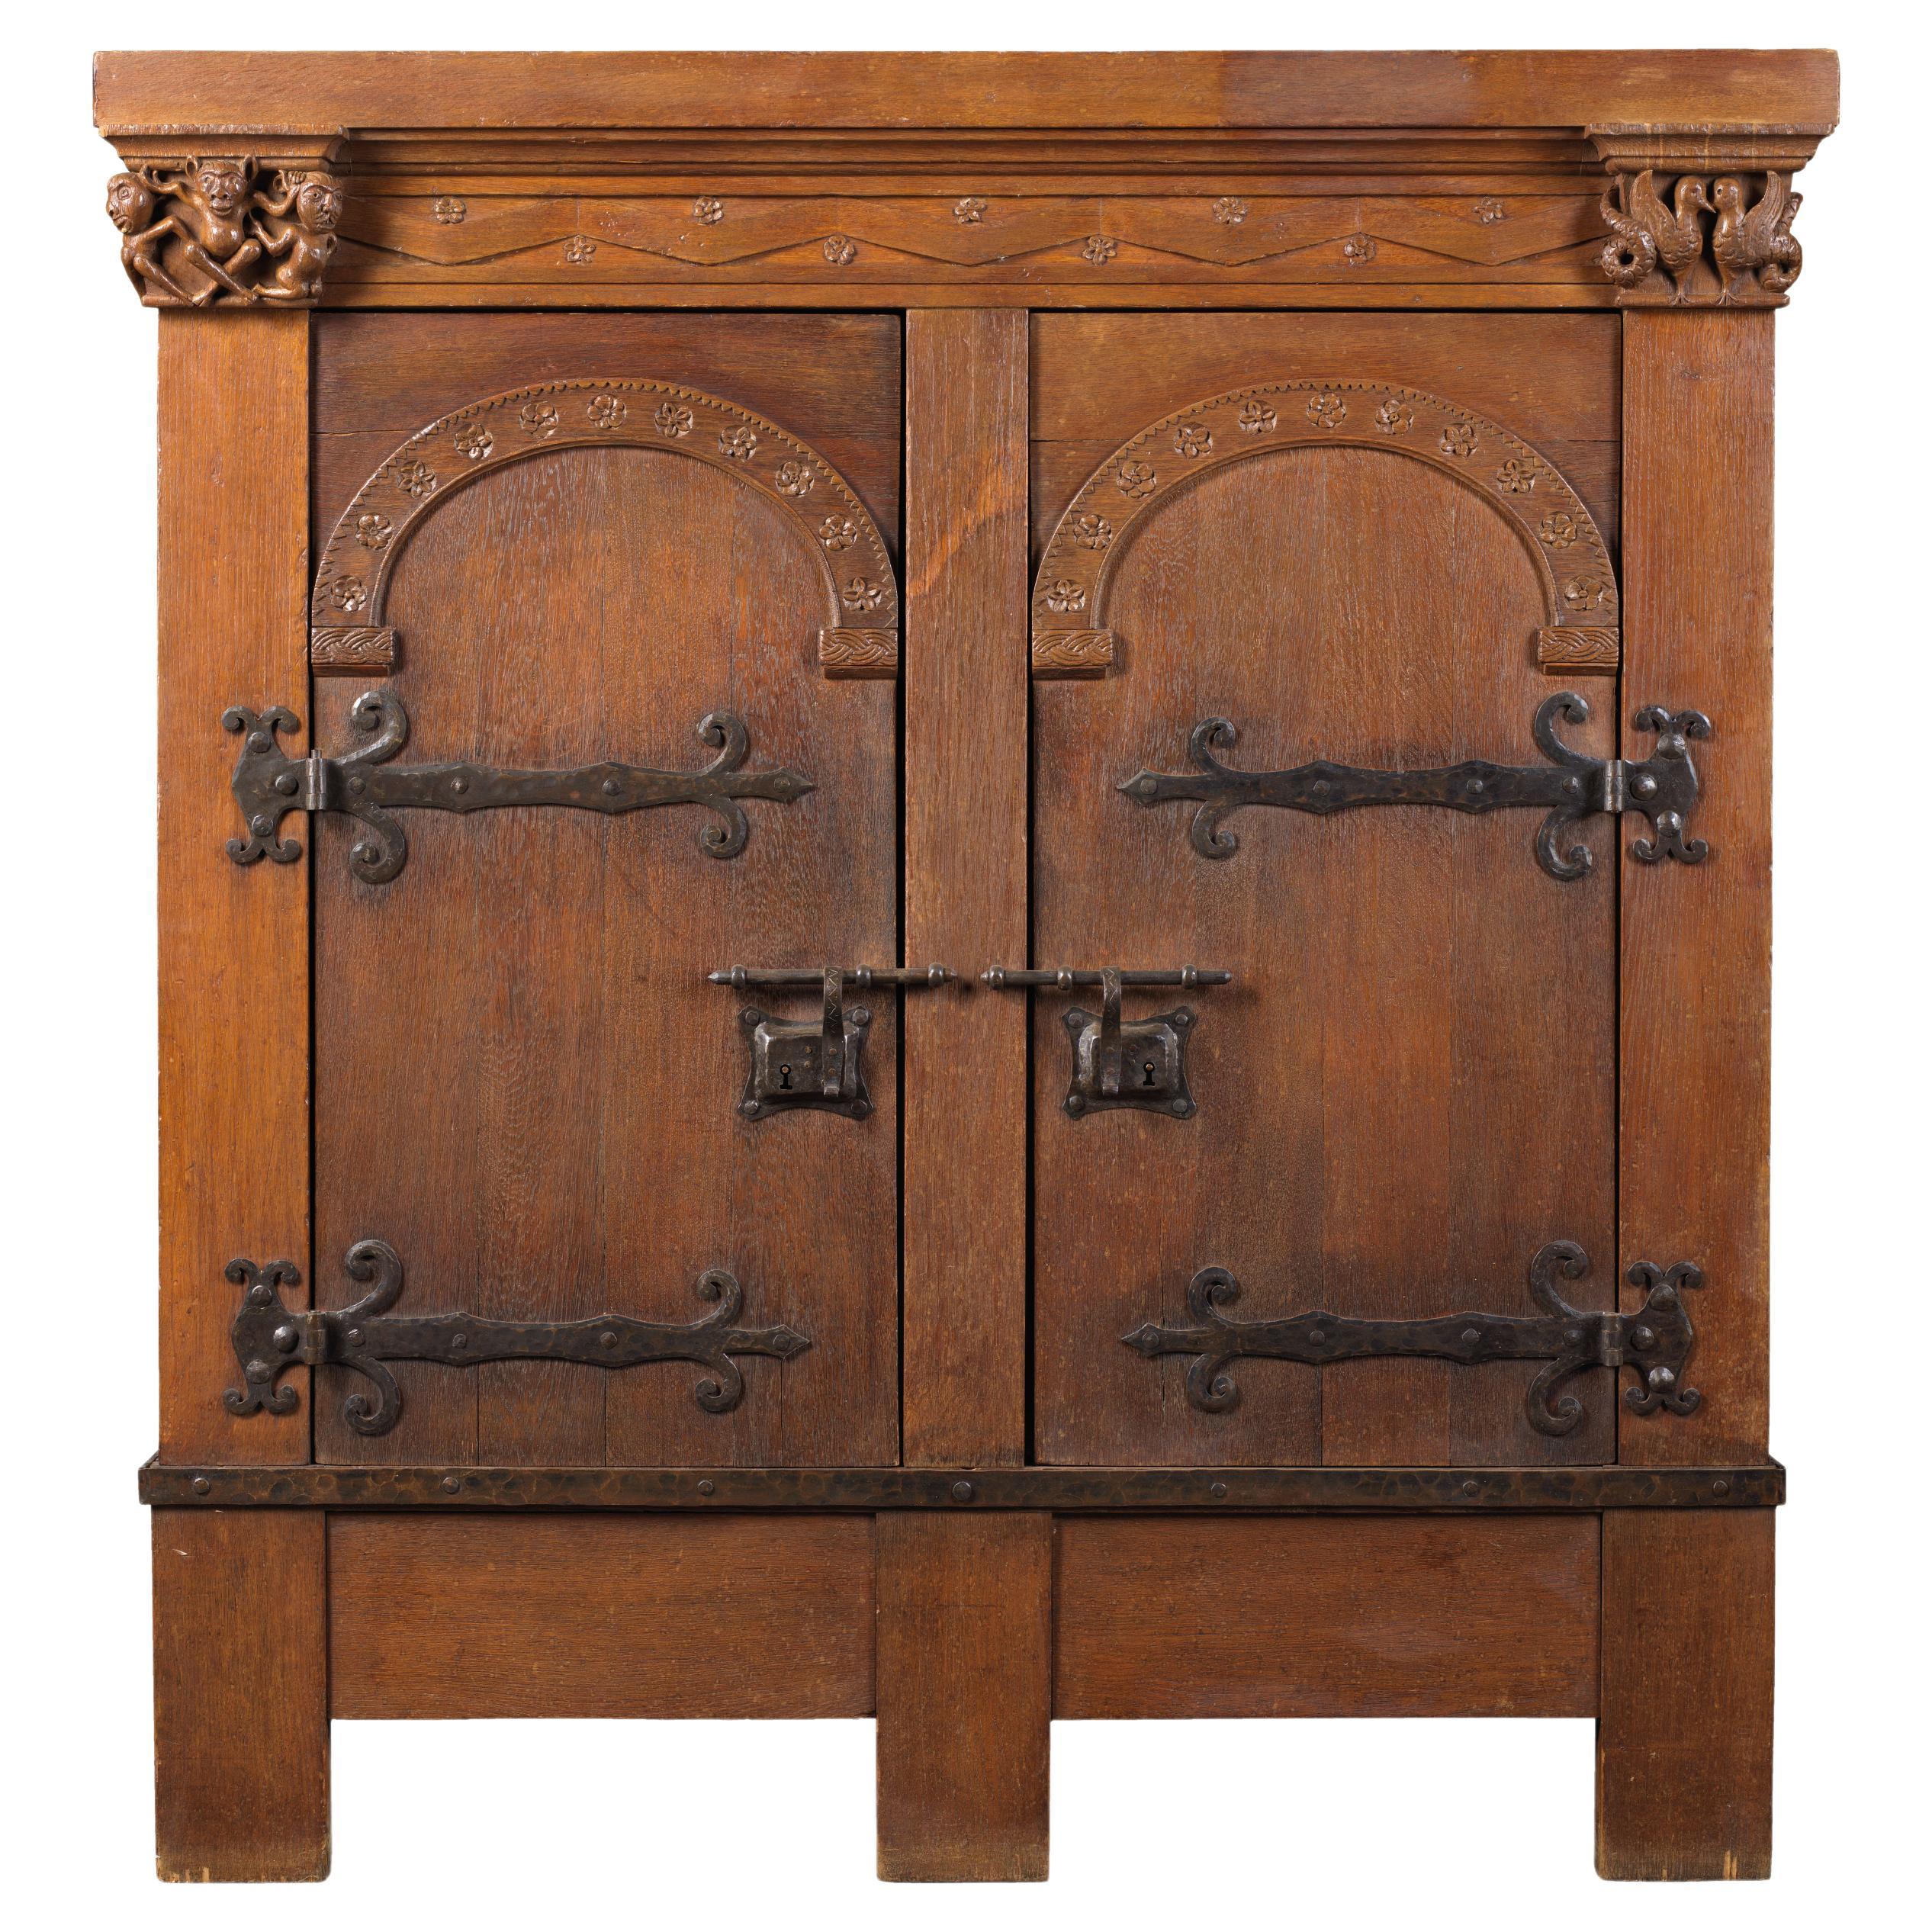 Gothic Revival Apothecary Cabinet For Sale